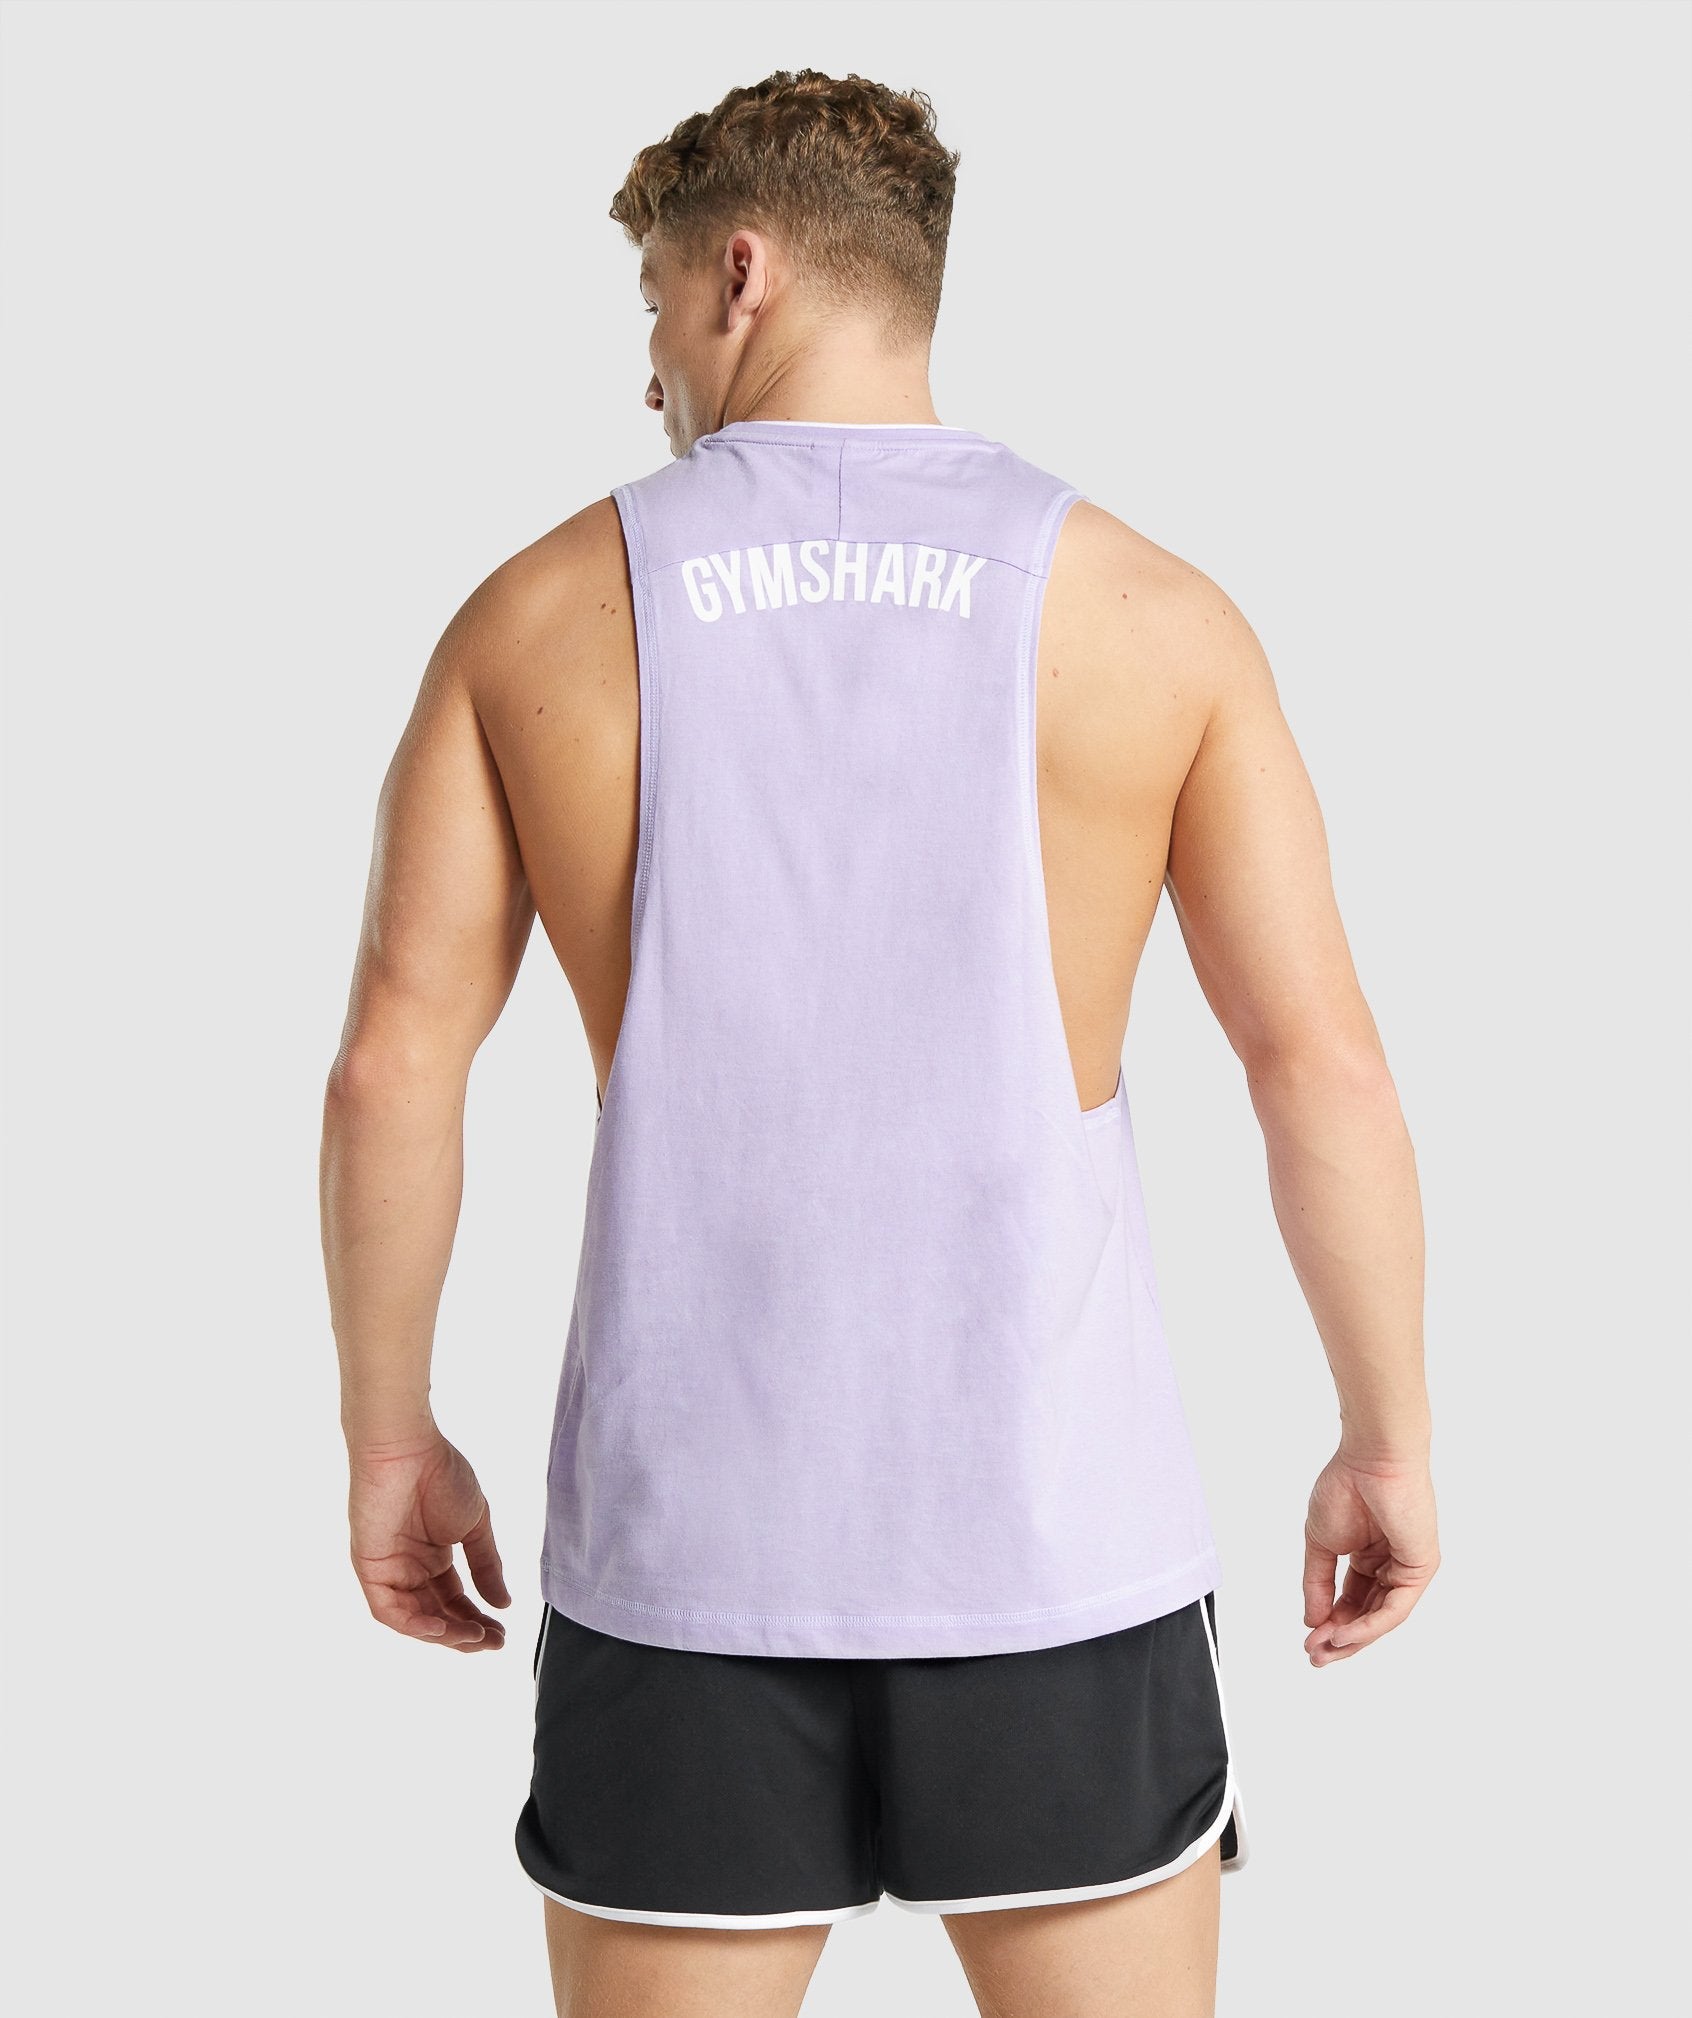 Gymshark, Tops, Gymshark Recess Lilac Purple Cropped Hoodie Size Sm